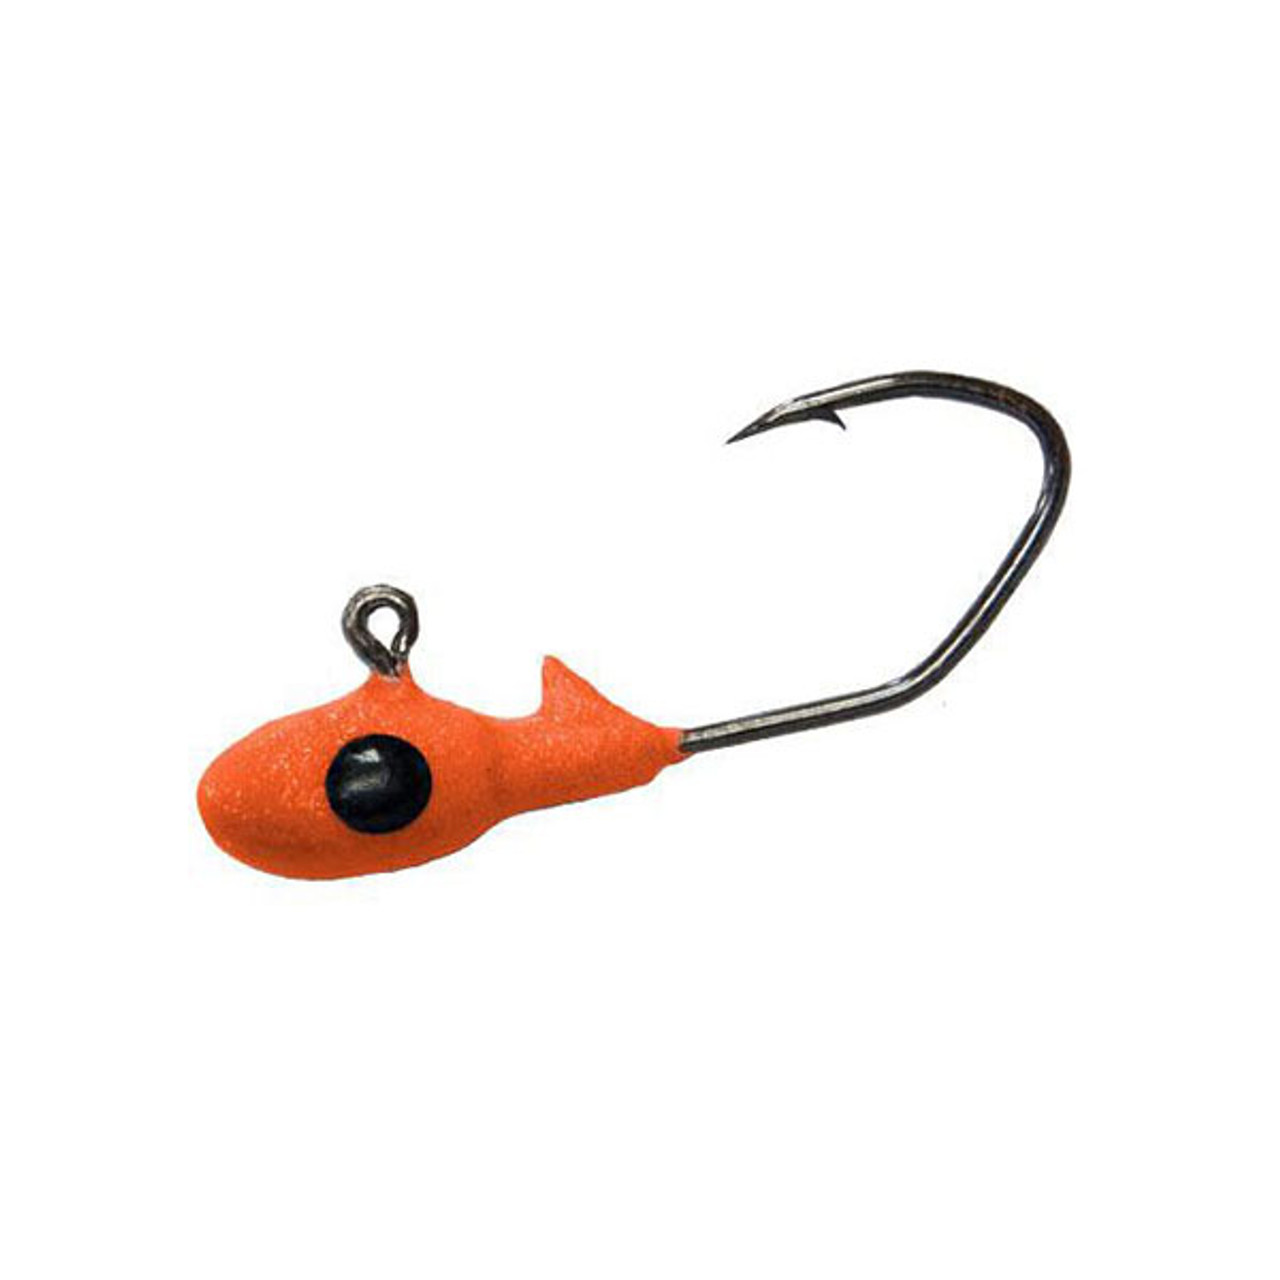 Bare Lead Wobble Jig with Sickle Hook